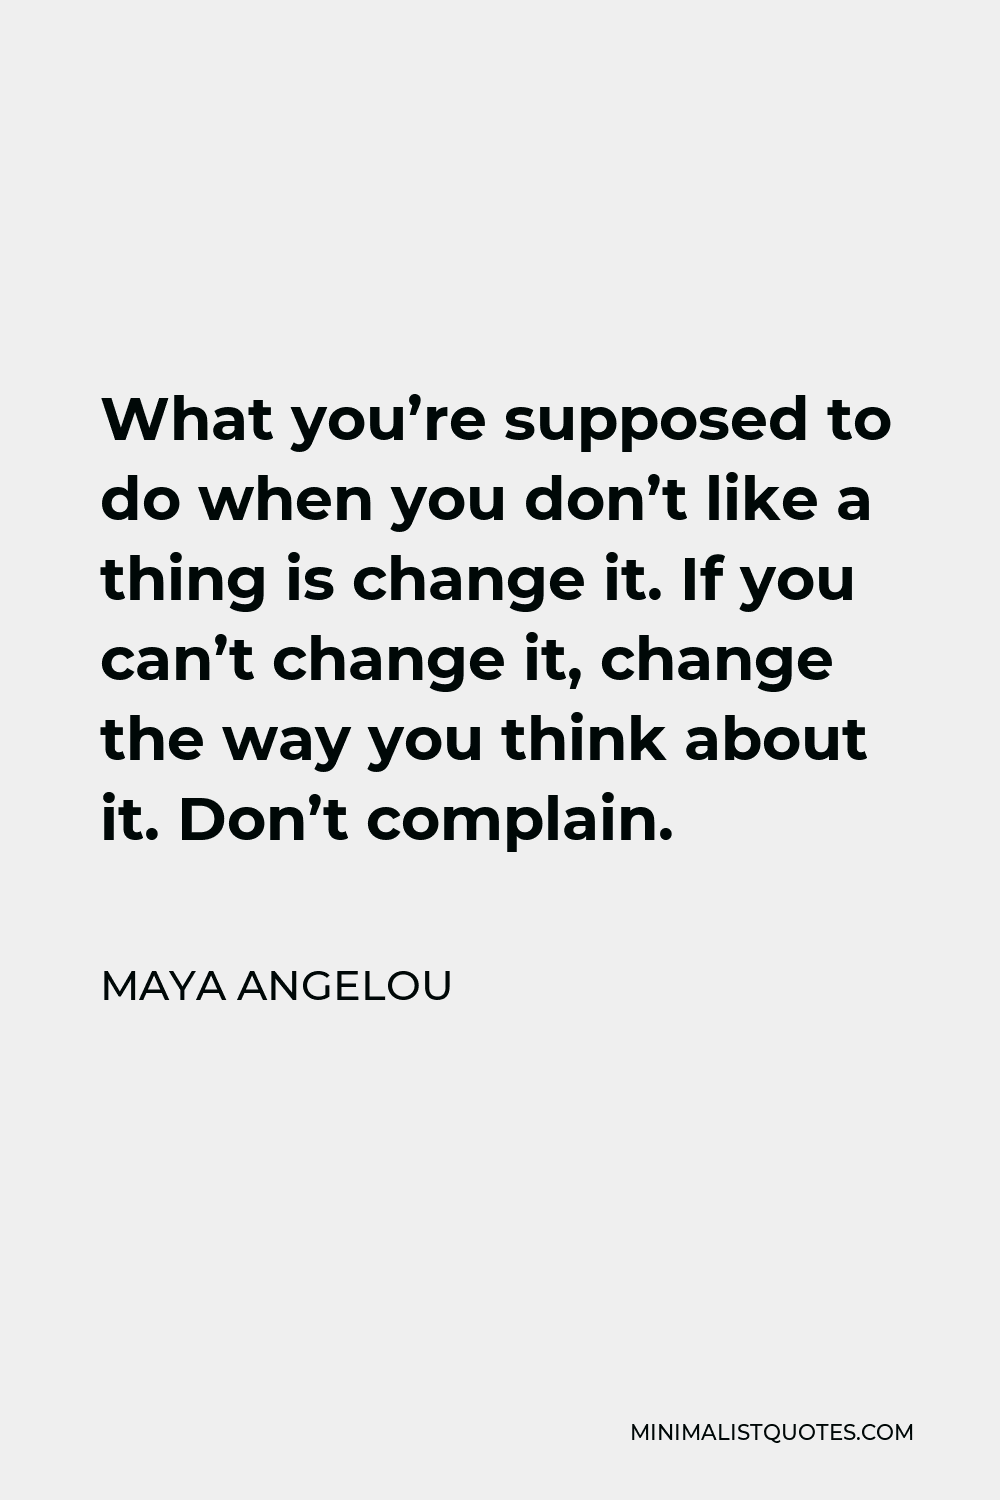 Maya Angelou Quote - What you’re supposed to do when you don’t like a thing is change it. If you can’t change it, change the way you think about it. Don’t complain.